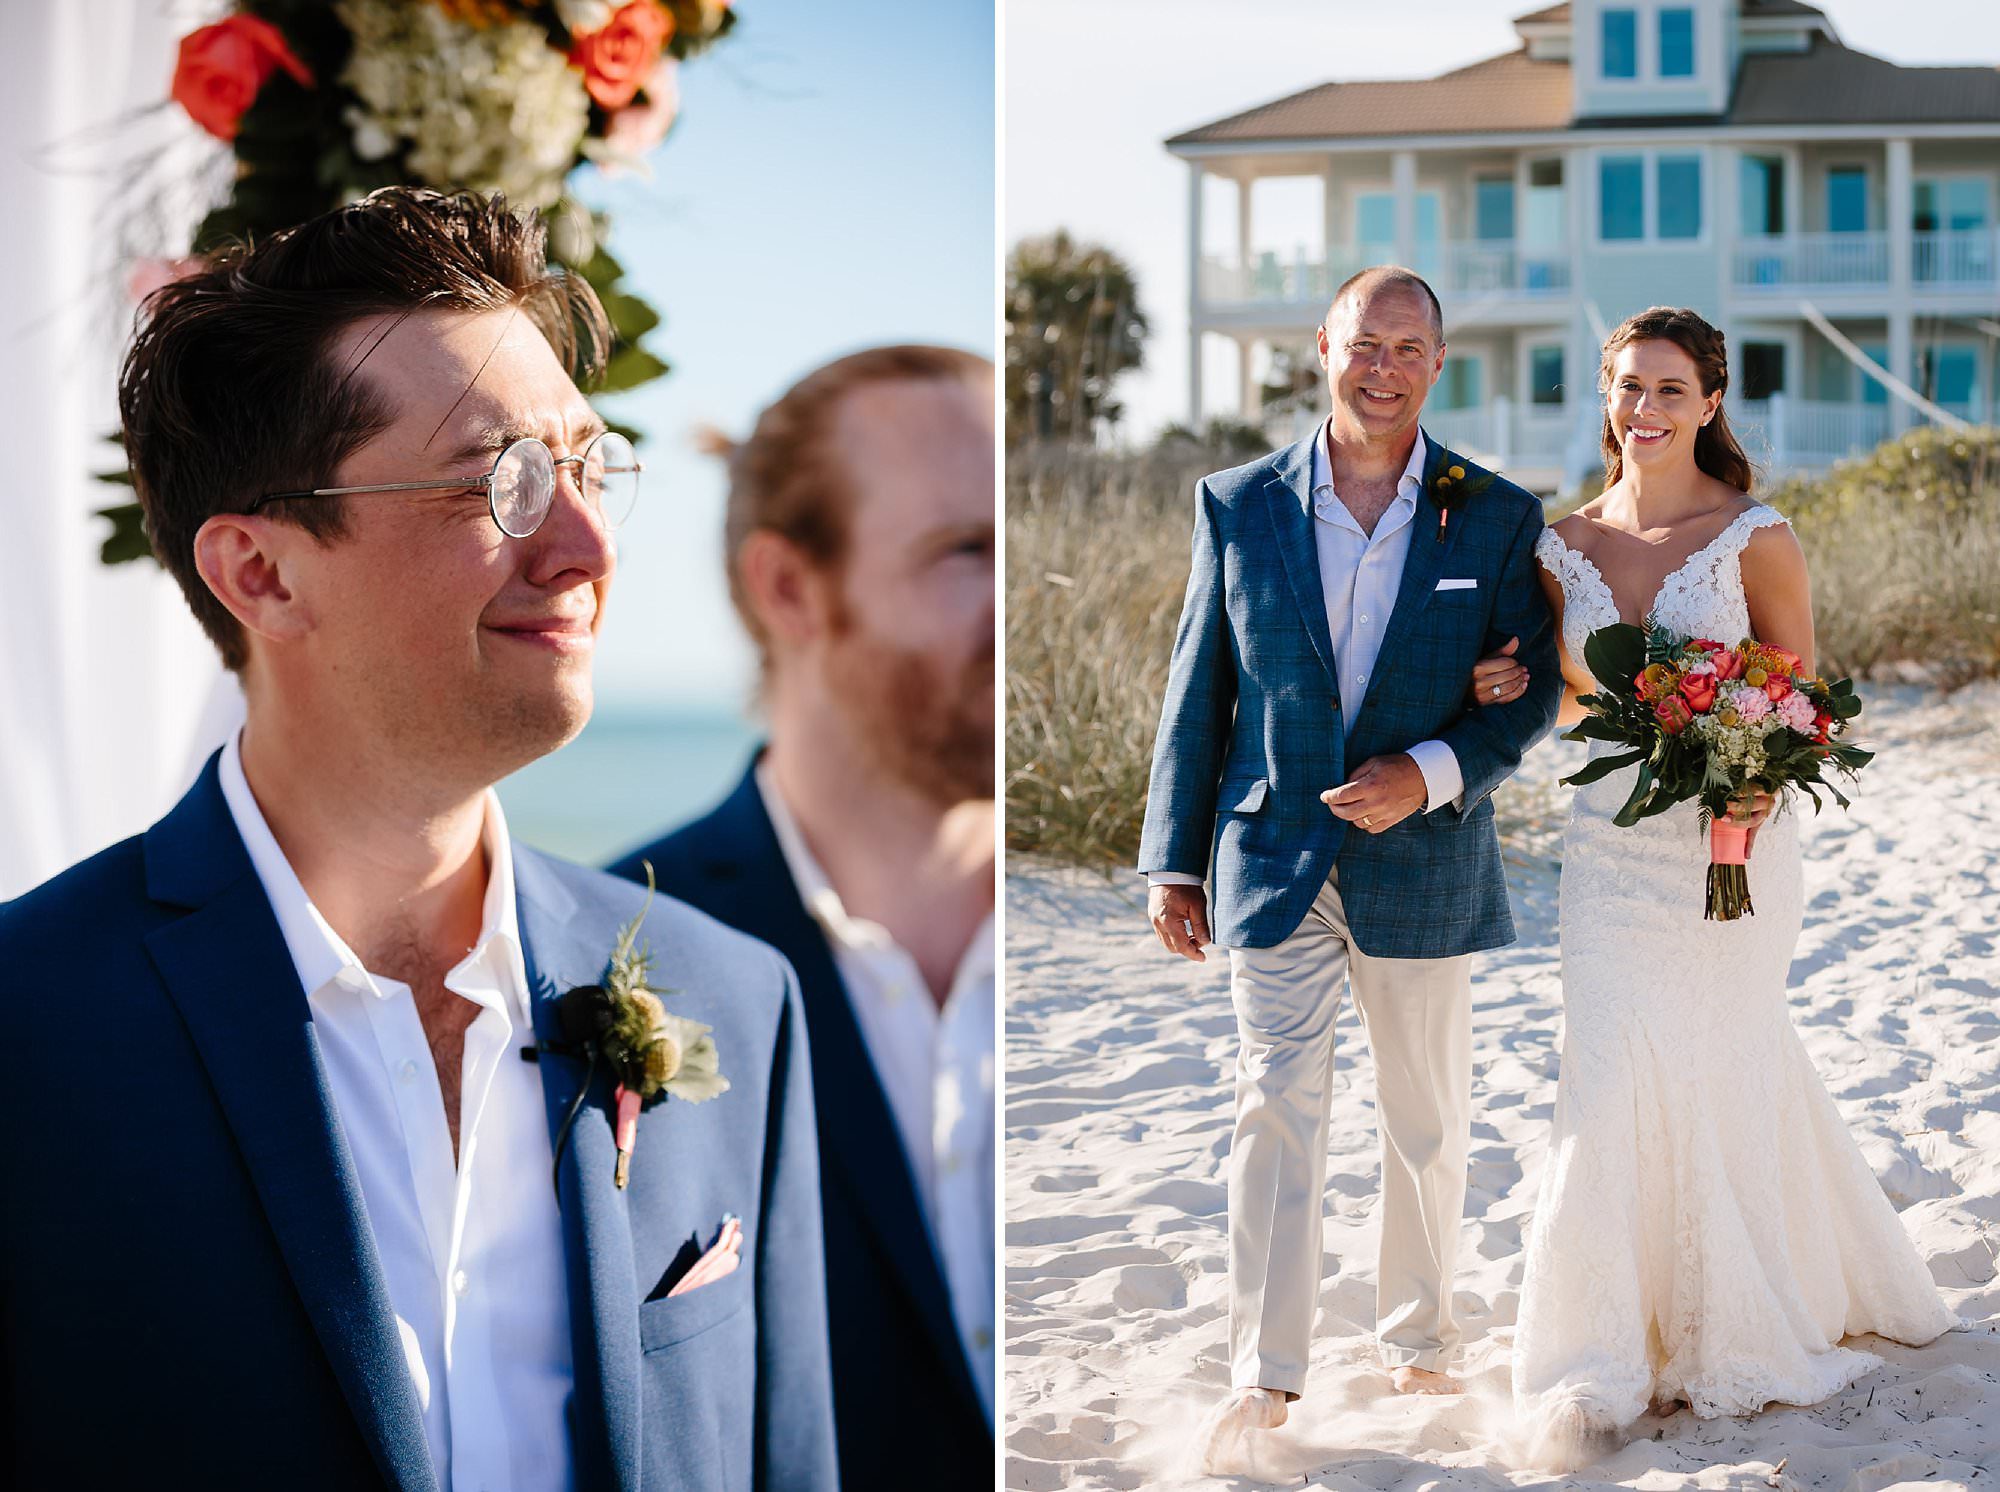 Groom crying when seeing bride at beach ceremony